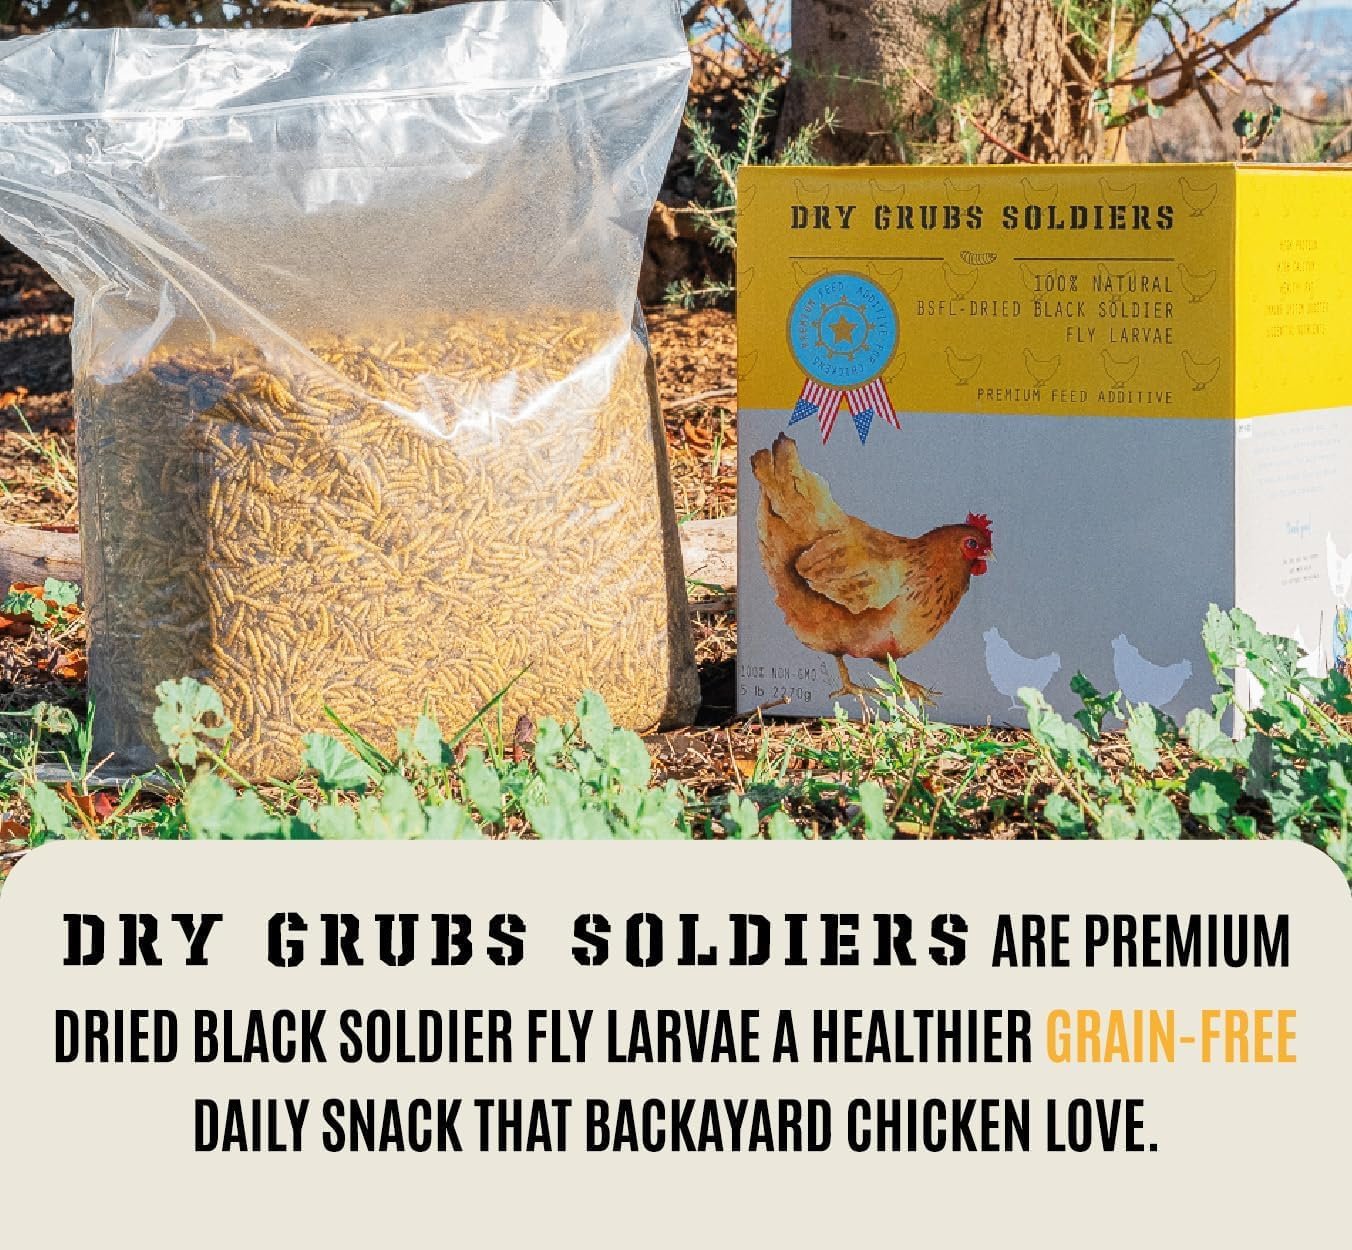 DRY GRUBS SOLDIERS - Superior to Dried Mealworms for Chickens - Non-GMO 90X More Calcium Than Meal Worms - Poultry Feed  Molting Supplement - Black Soldier Fly Larvae for Hens Ducks Wild Birds - 5lbs